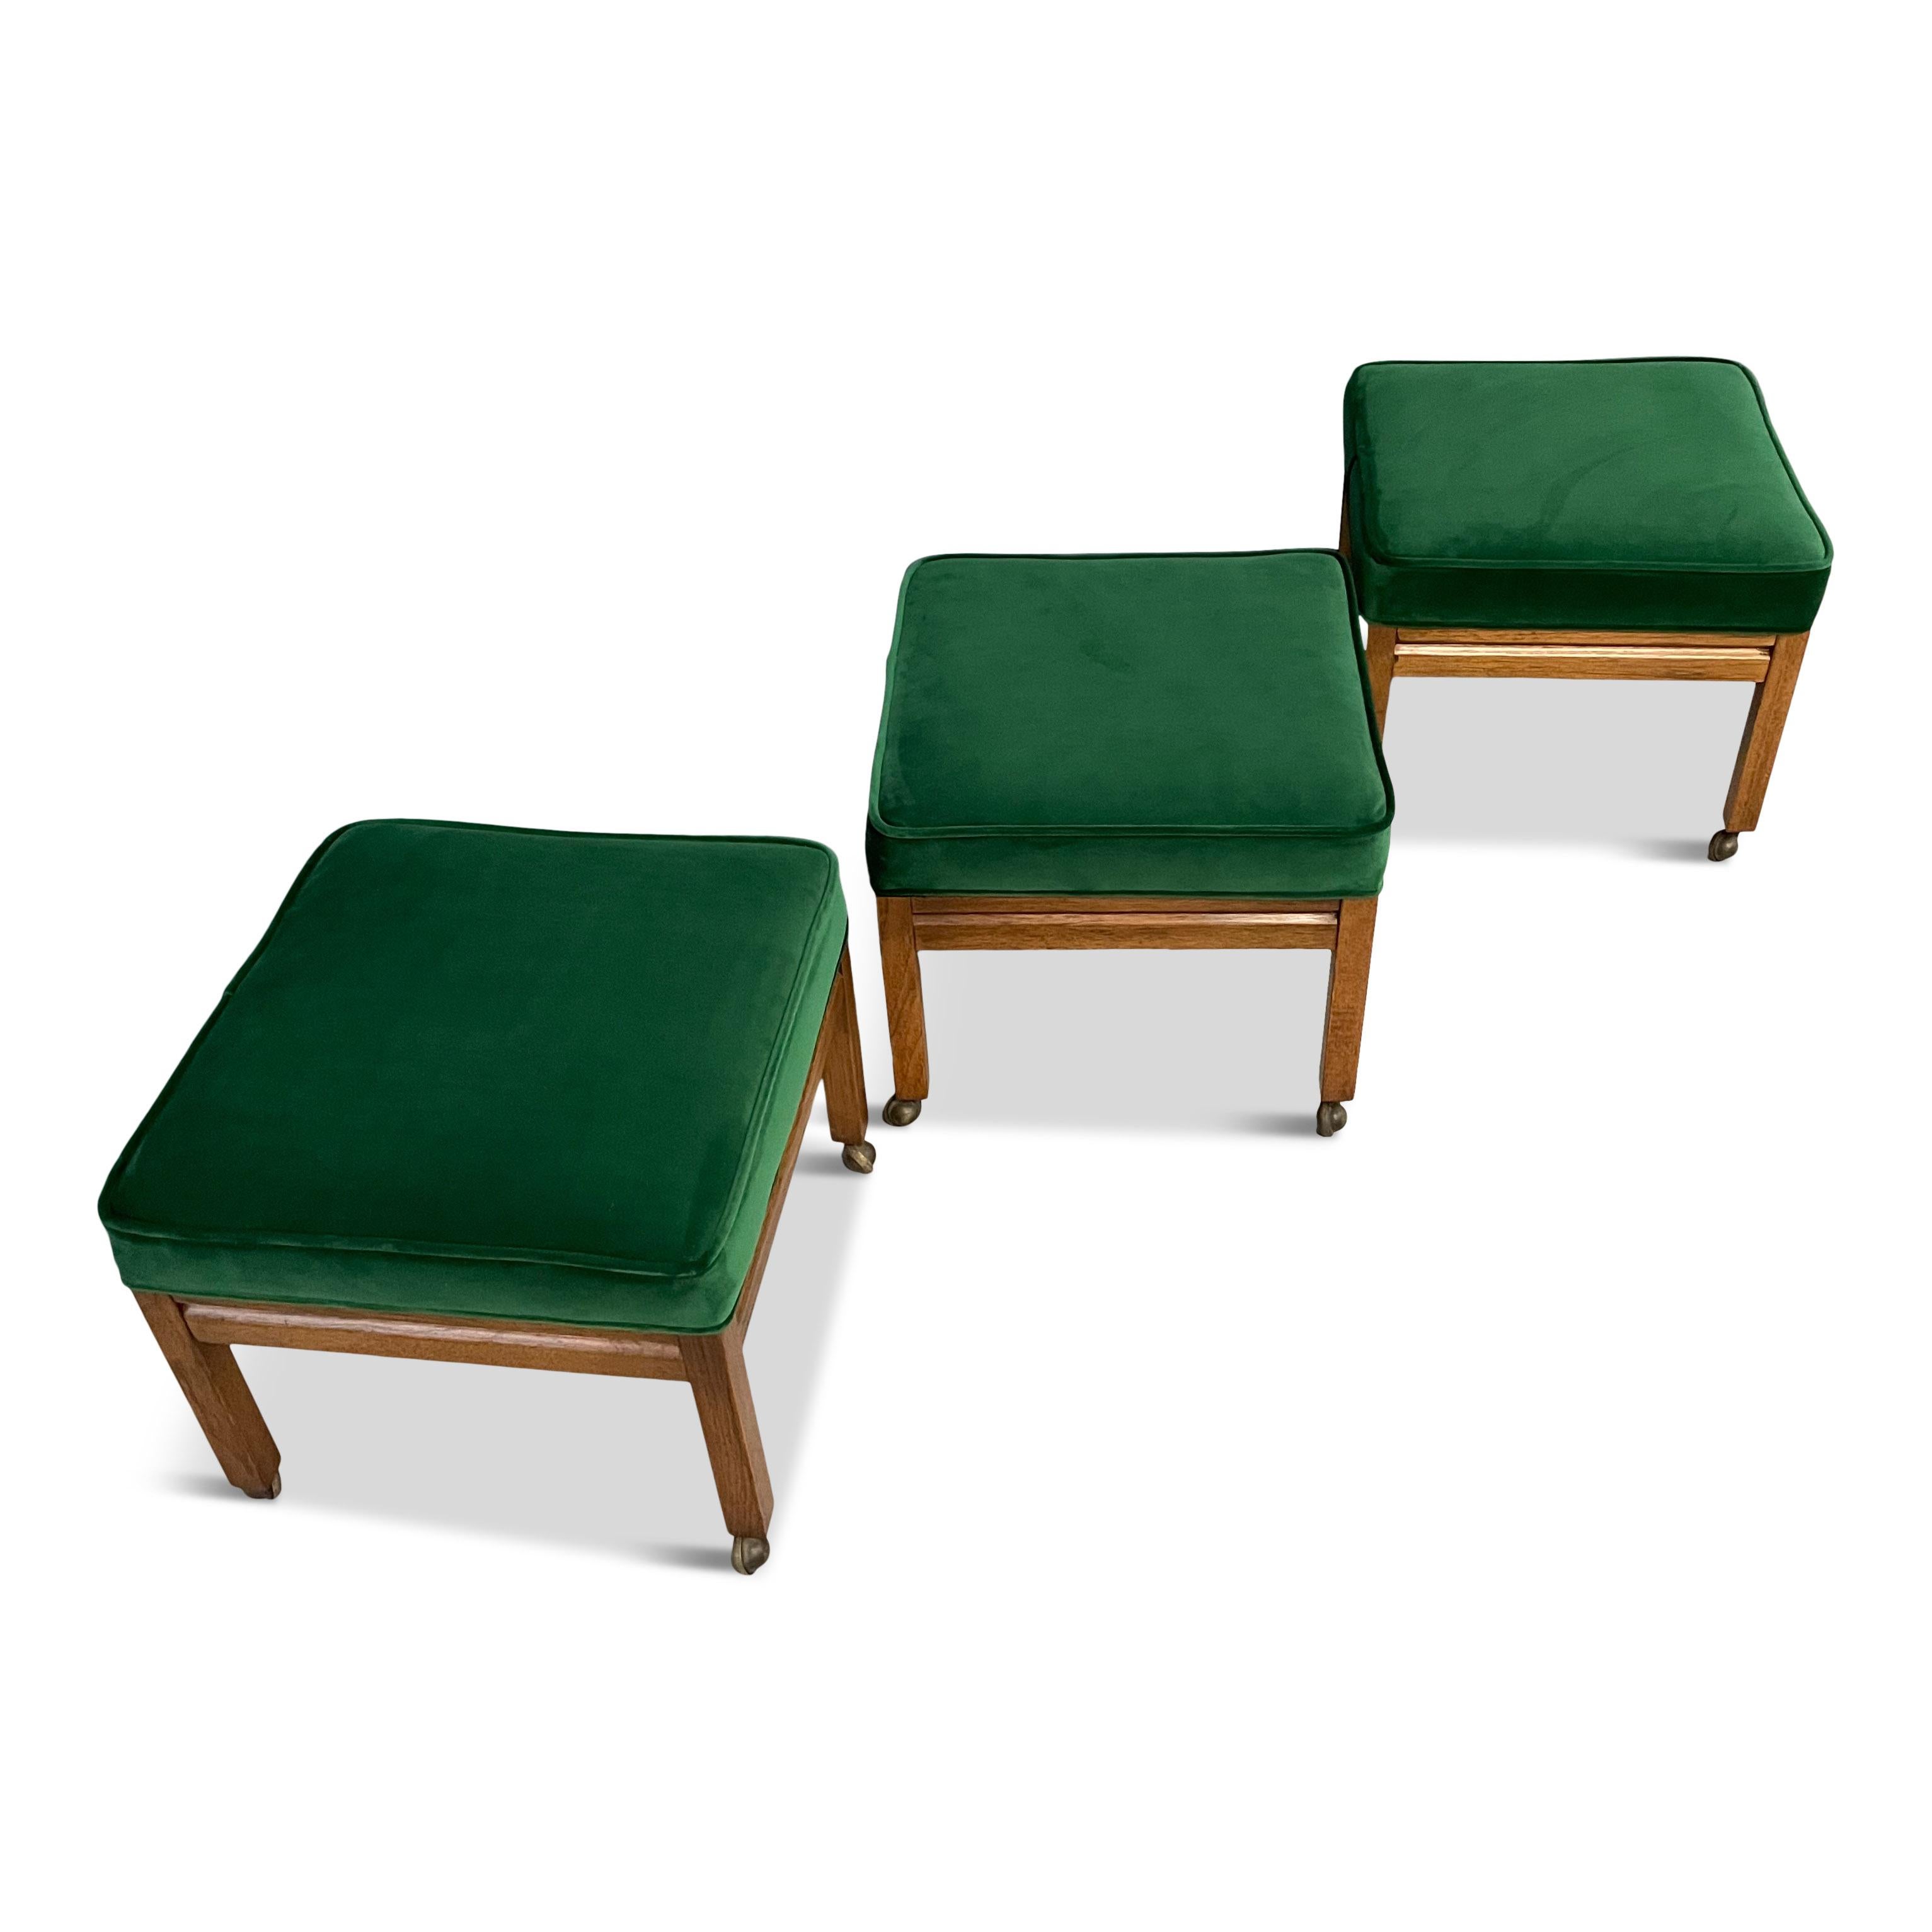 Mid-Century Modern Trio of Square Upholstered Stools in Emerald Velvet and Pecan Probber Style For Sale